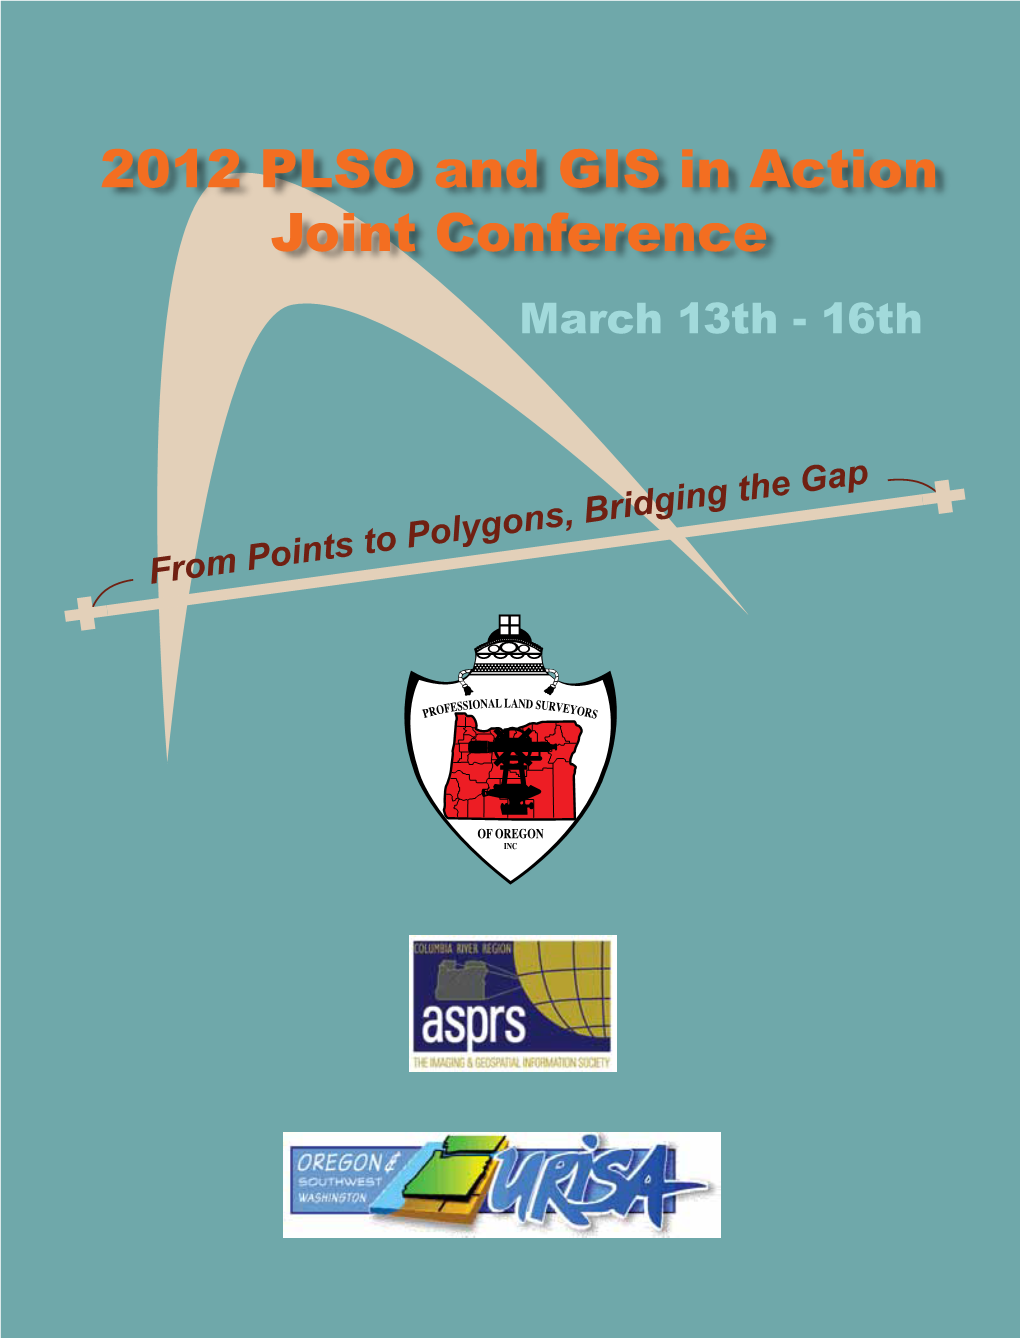 2012 PLSO and GIS in Action Joint Conference March 13Th - 16Th